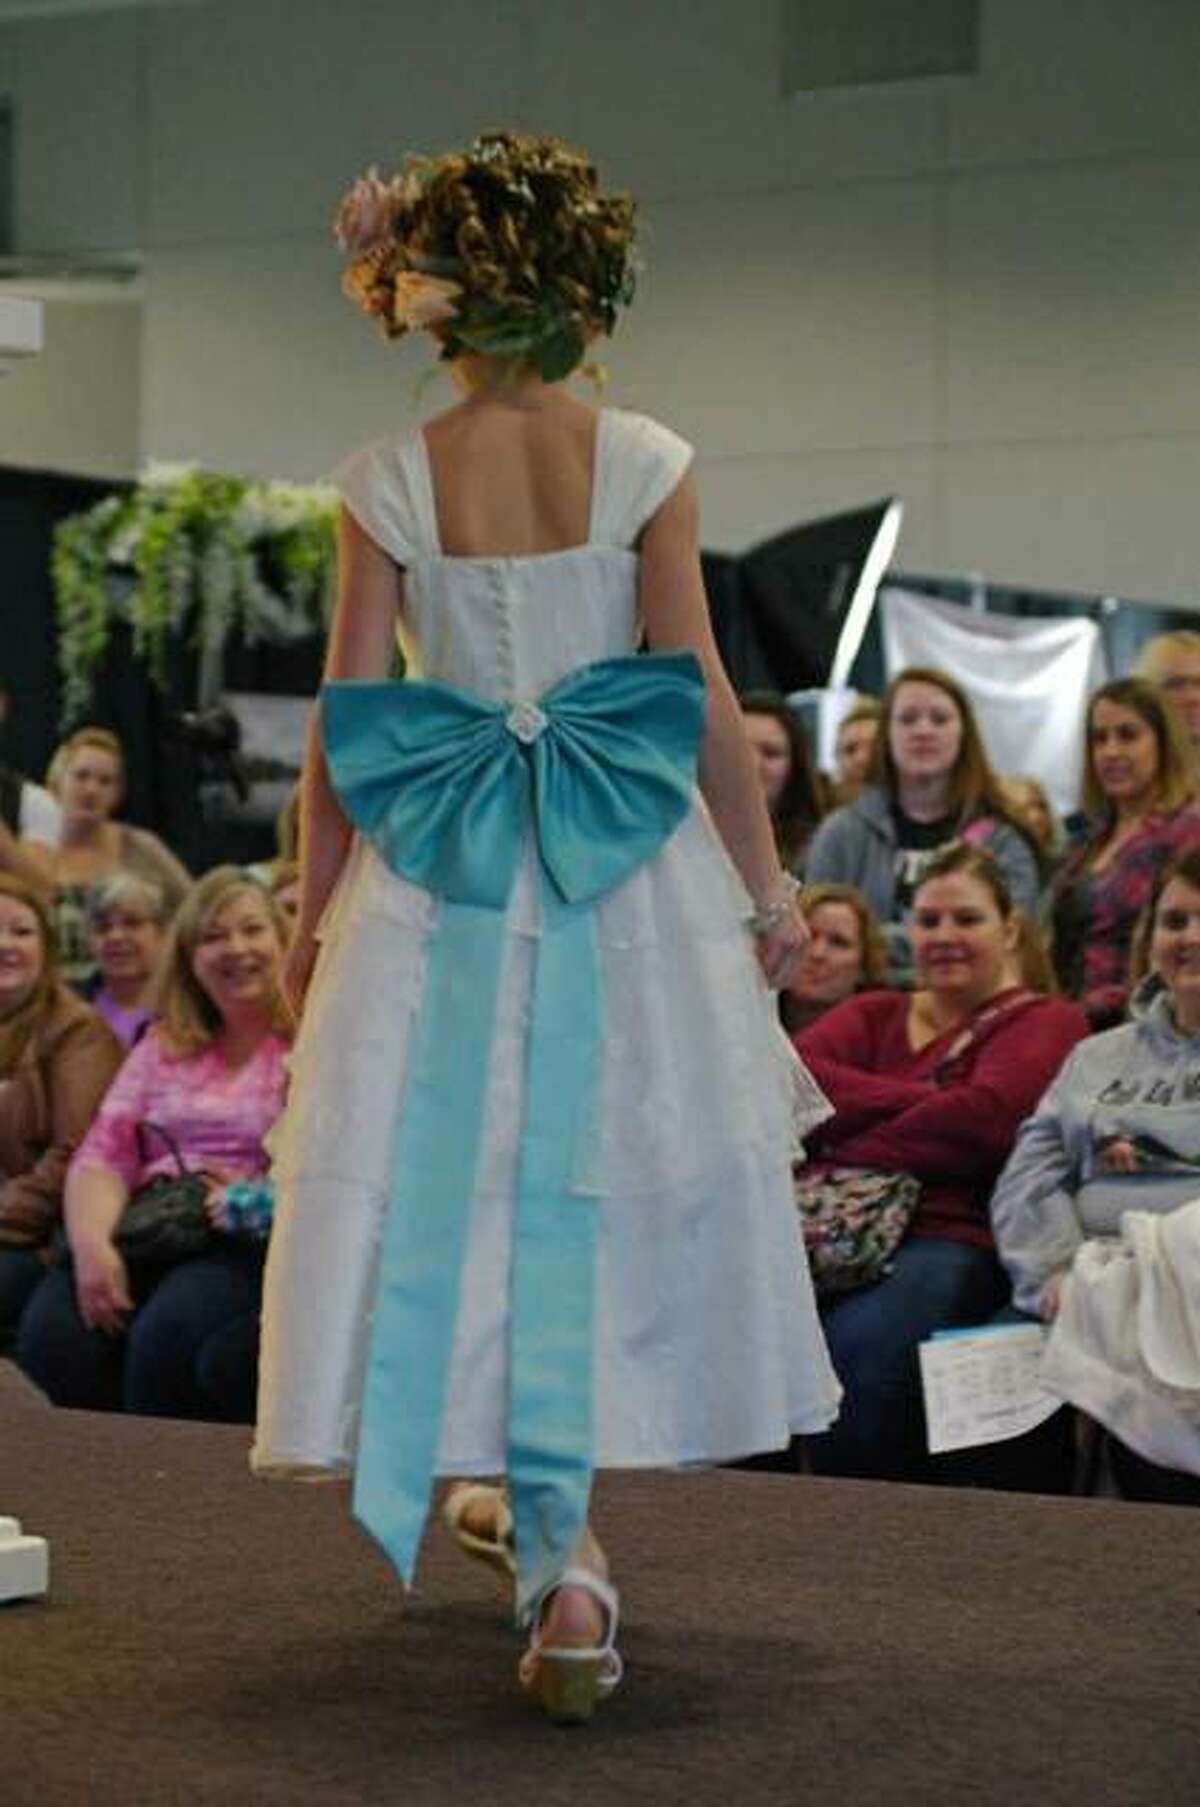 A flower girl dress being modeled at the bridal fashion show.